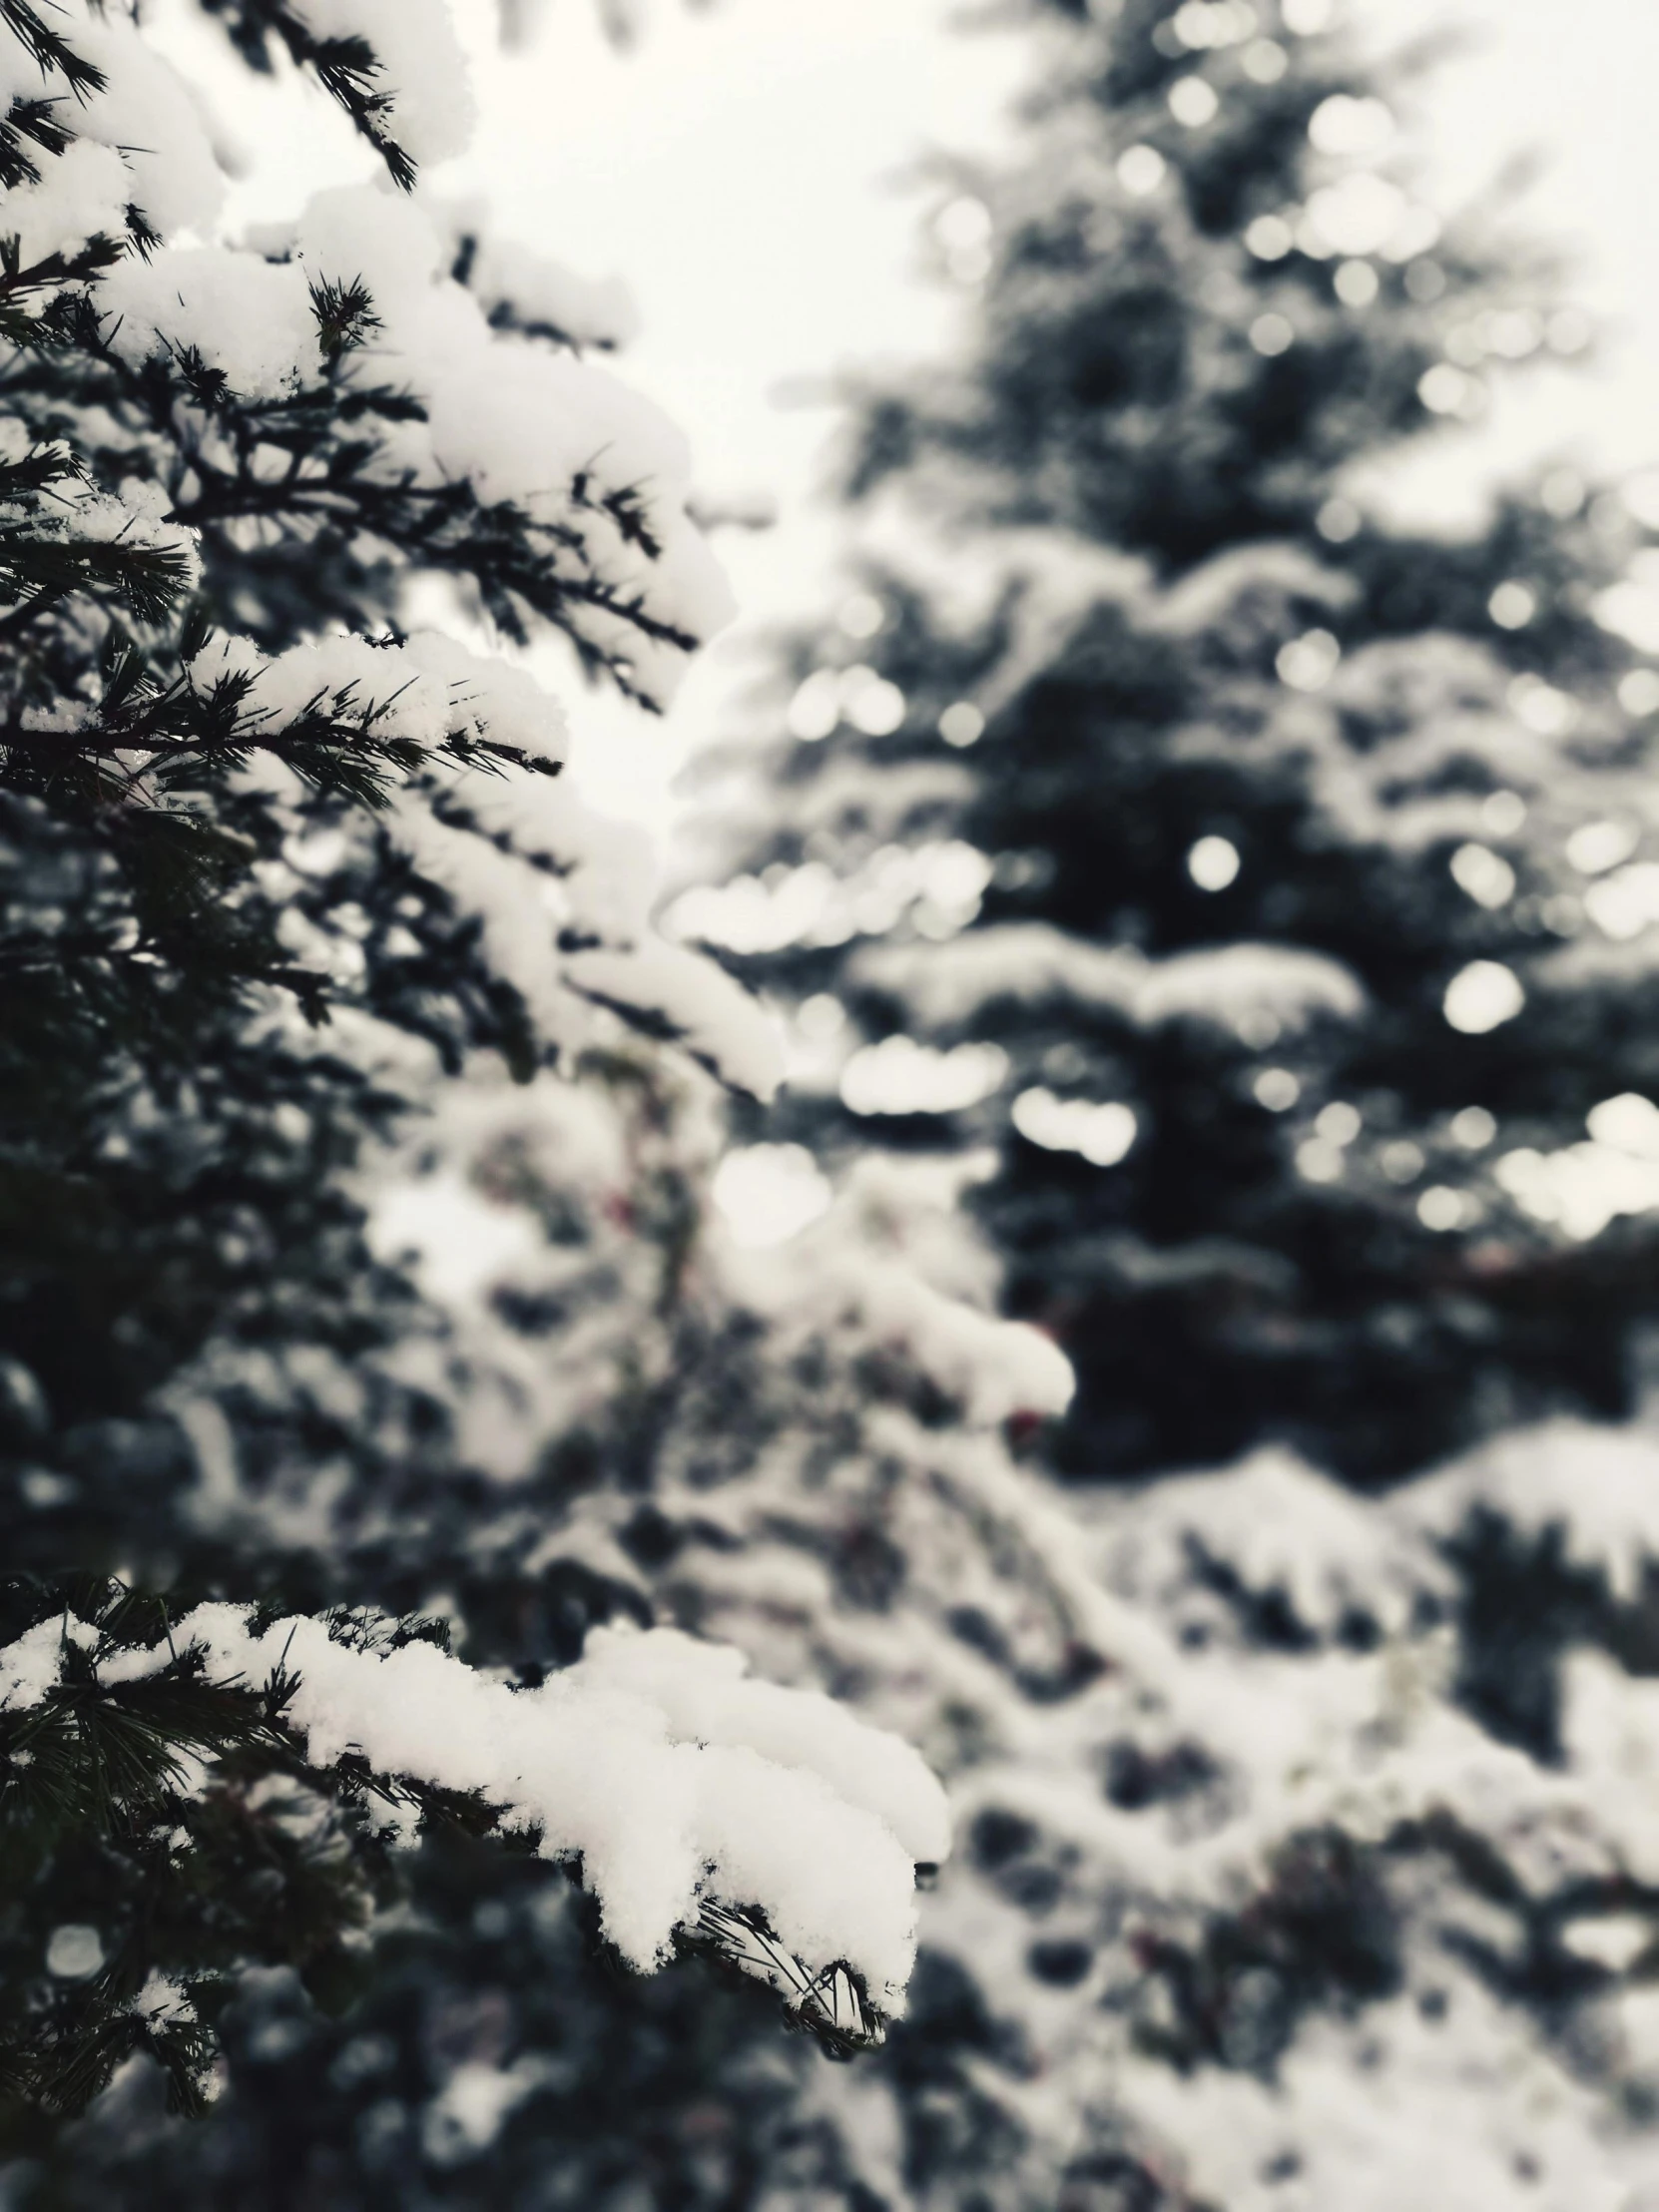 a snow covered pine tree with some snow on it